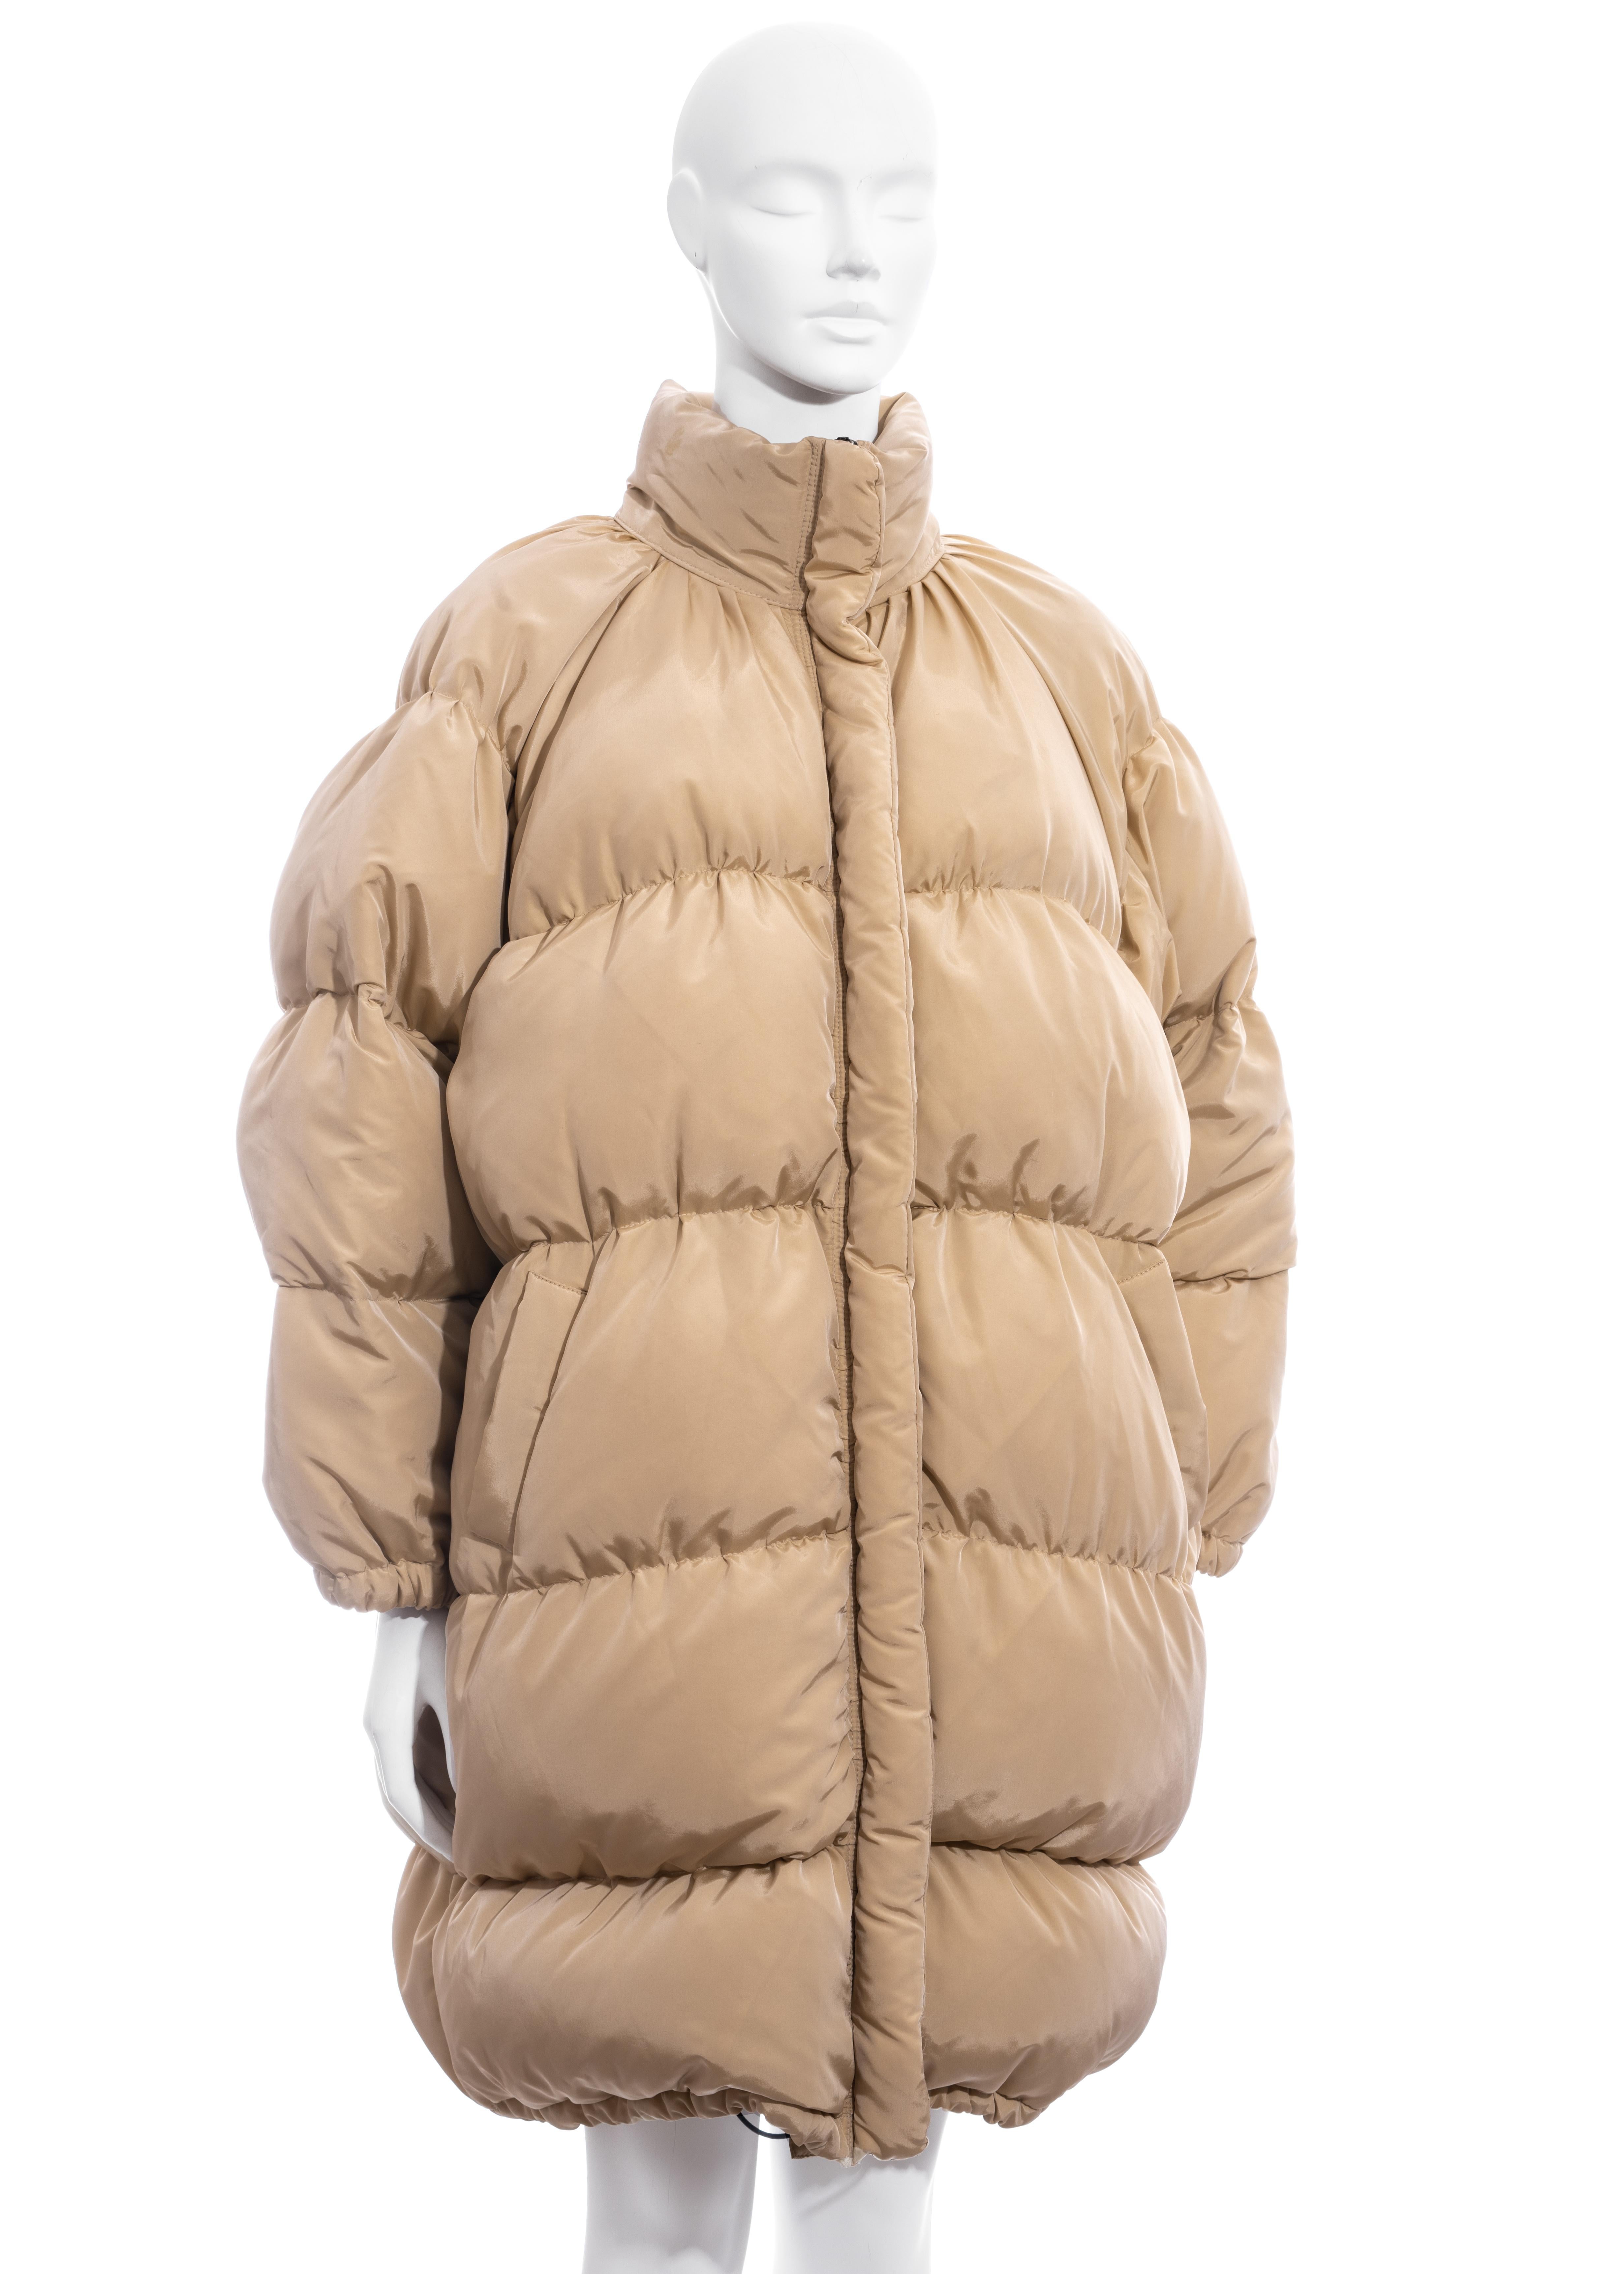 ▪ Jean Paul Gaultier cream puffer coat
▪ Oversized fit 
▪ Striped wool lining 
▪ Double zip front fastening 
▪ Two front pockets
▪ Size Small
▪ Fall-Winter 1999